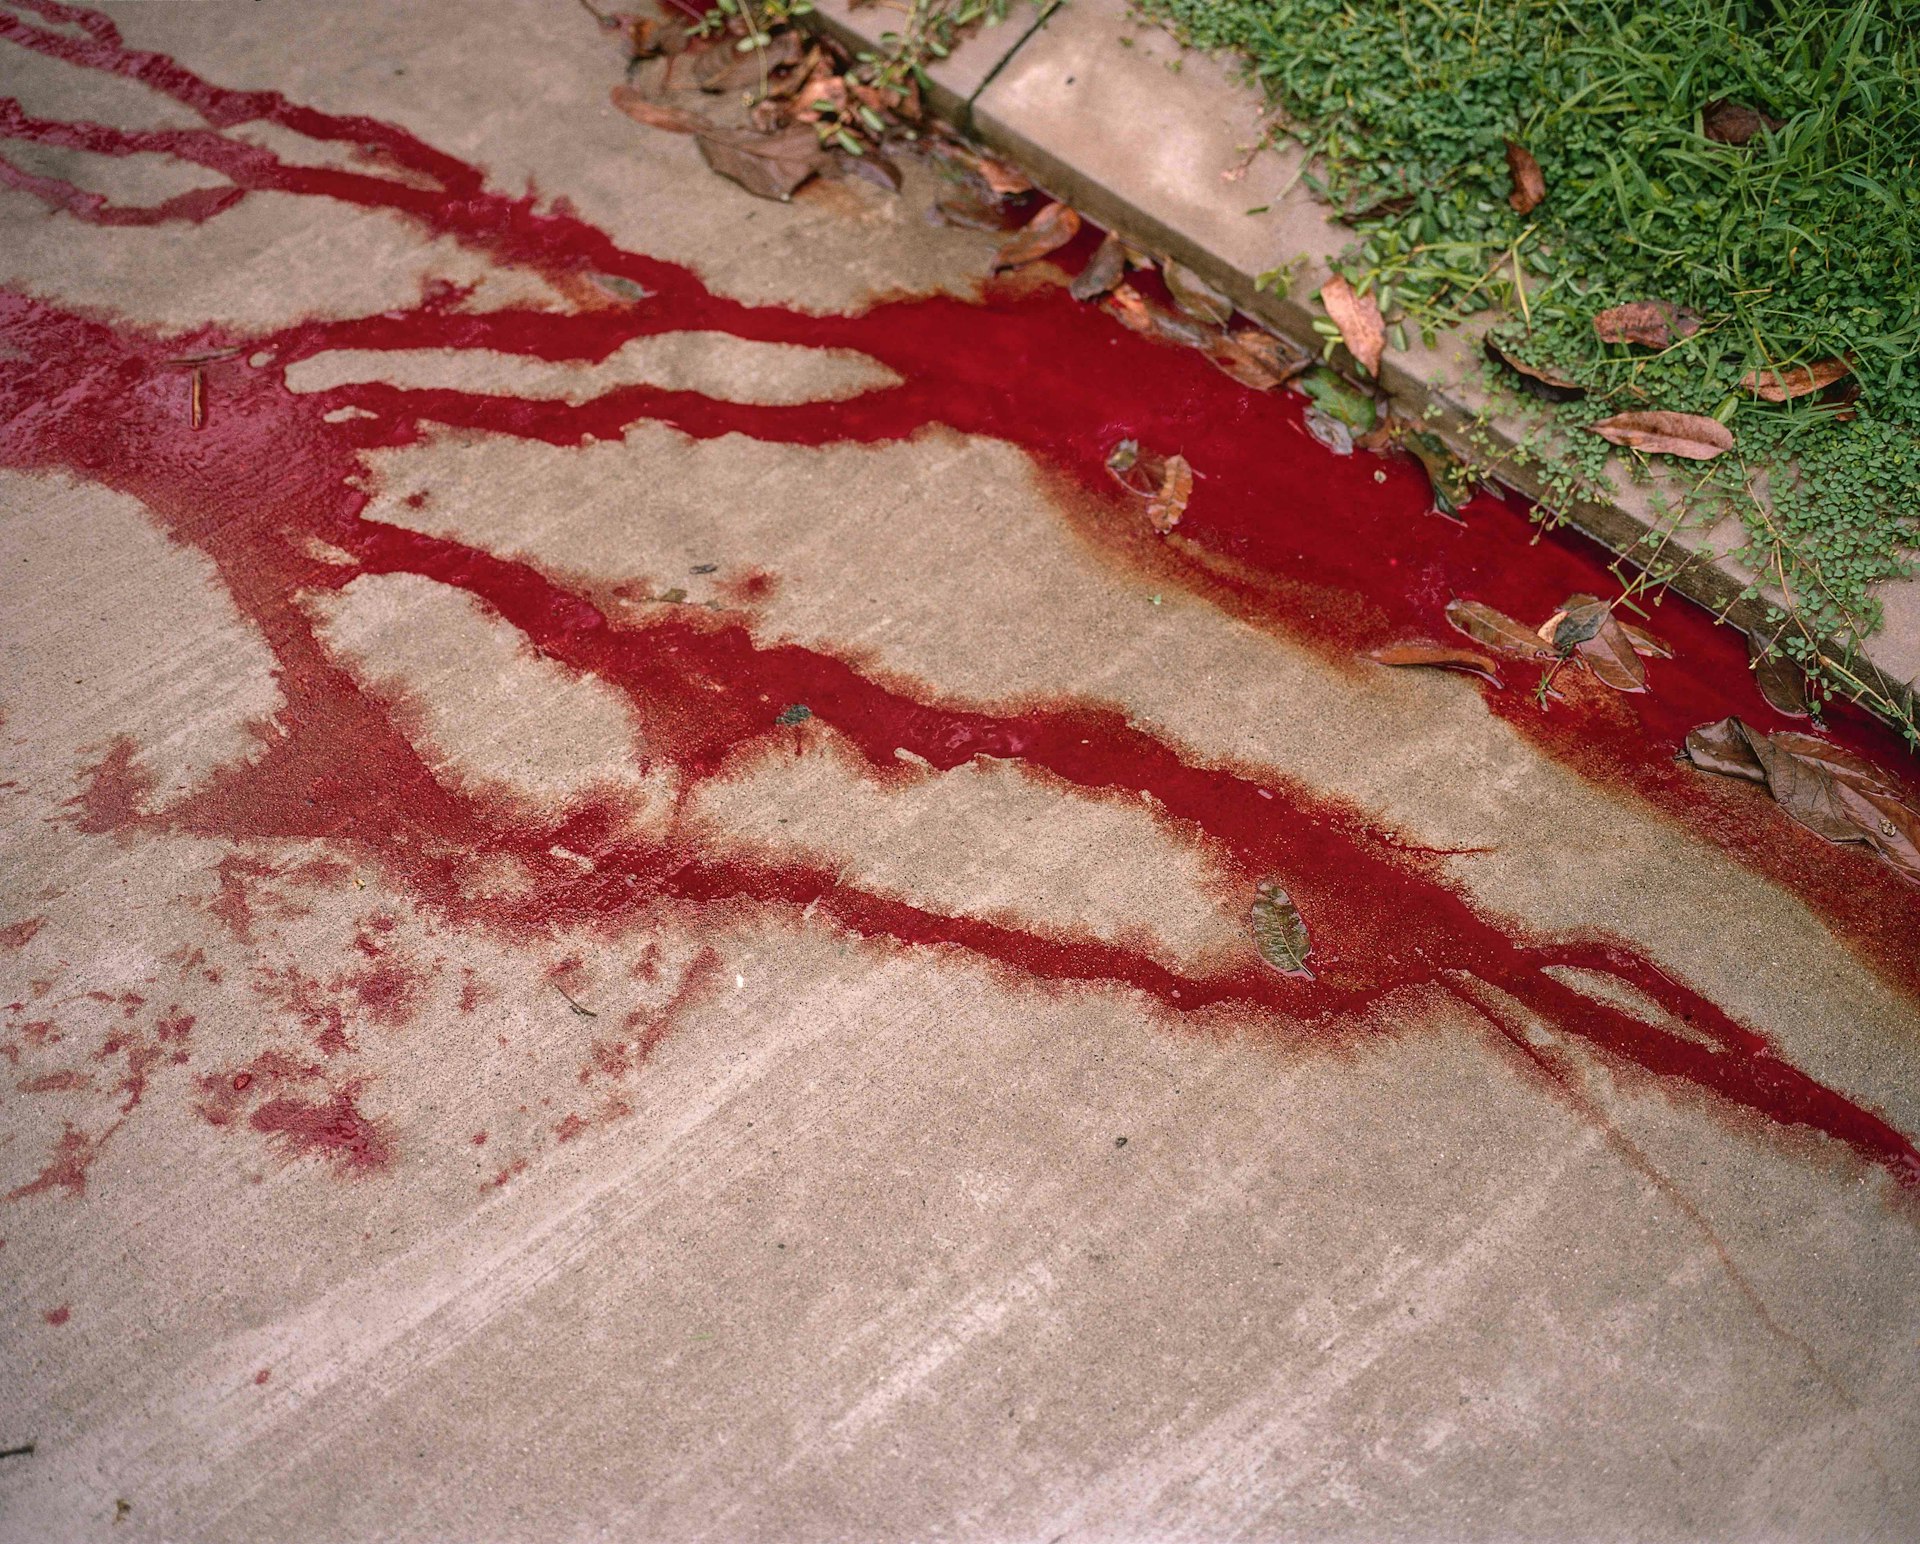 The blood of two brothers and their friend in San Pedro Sula.